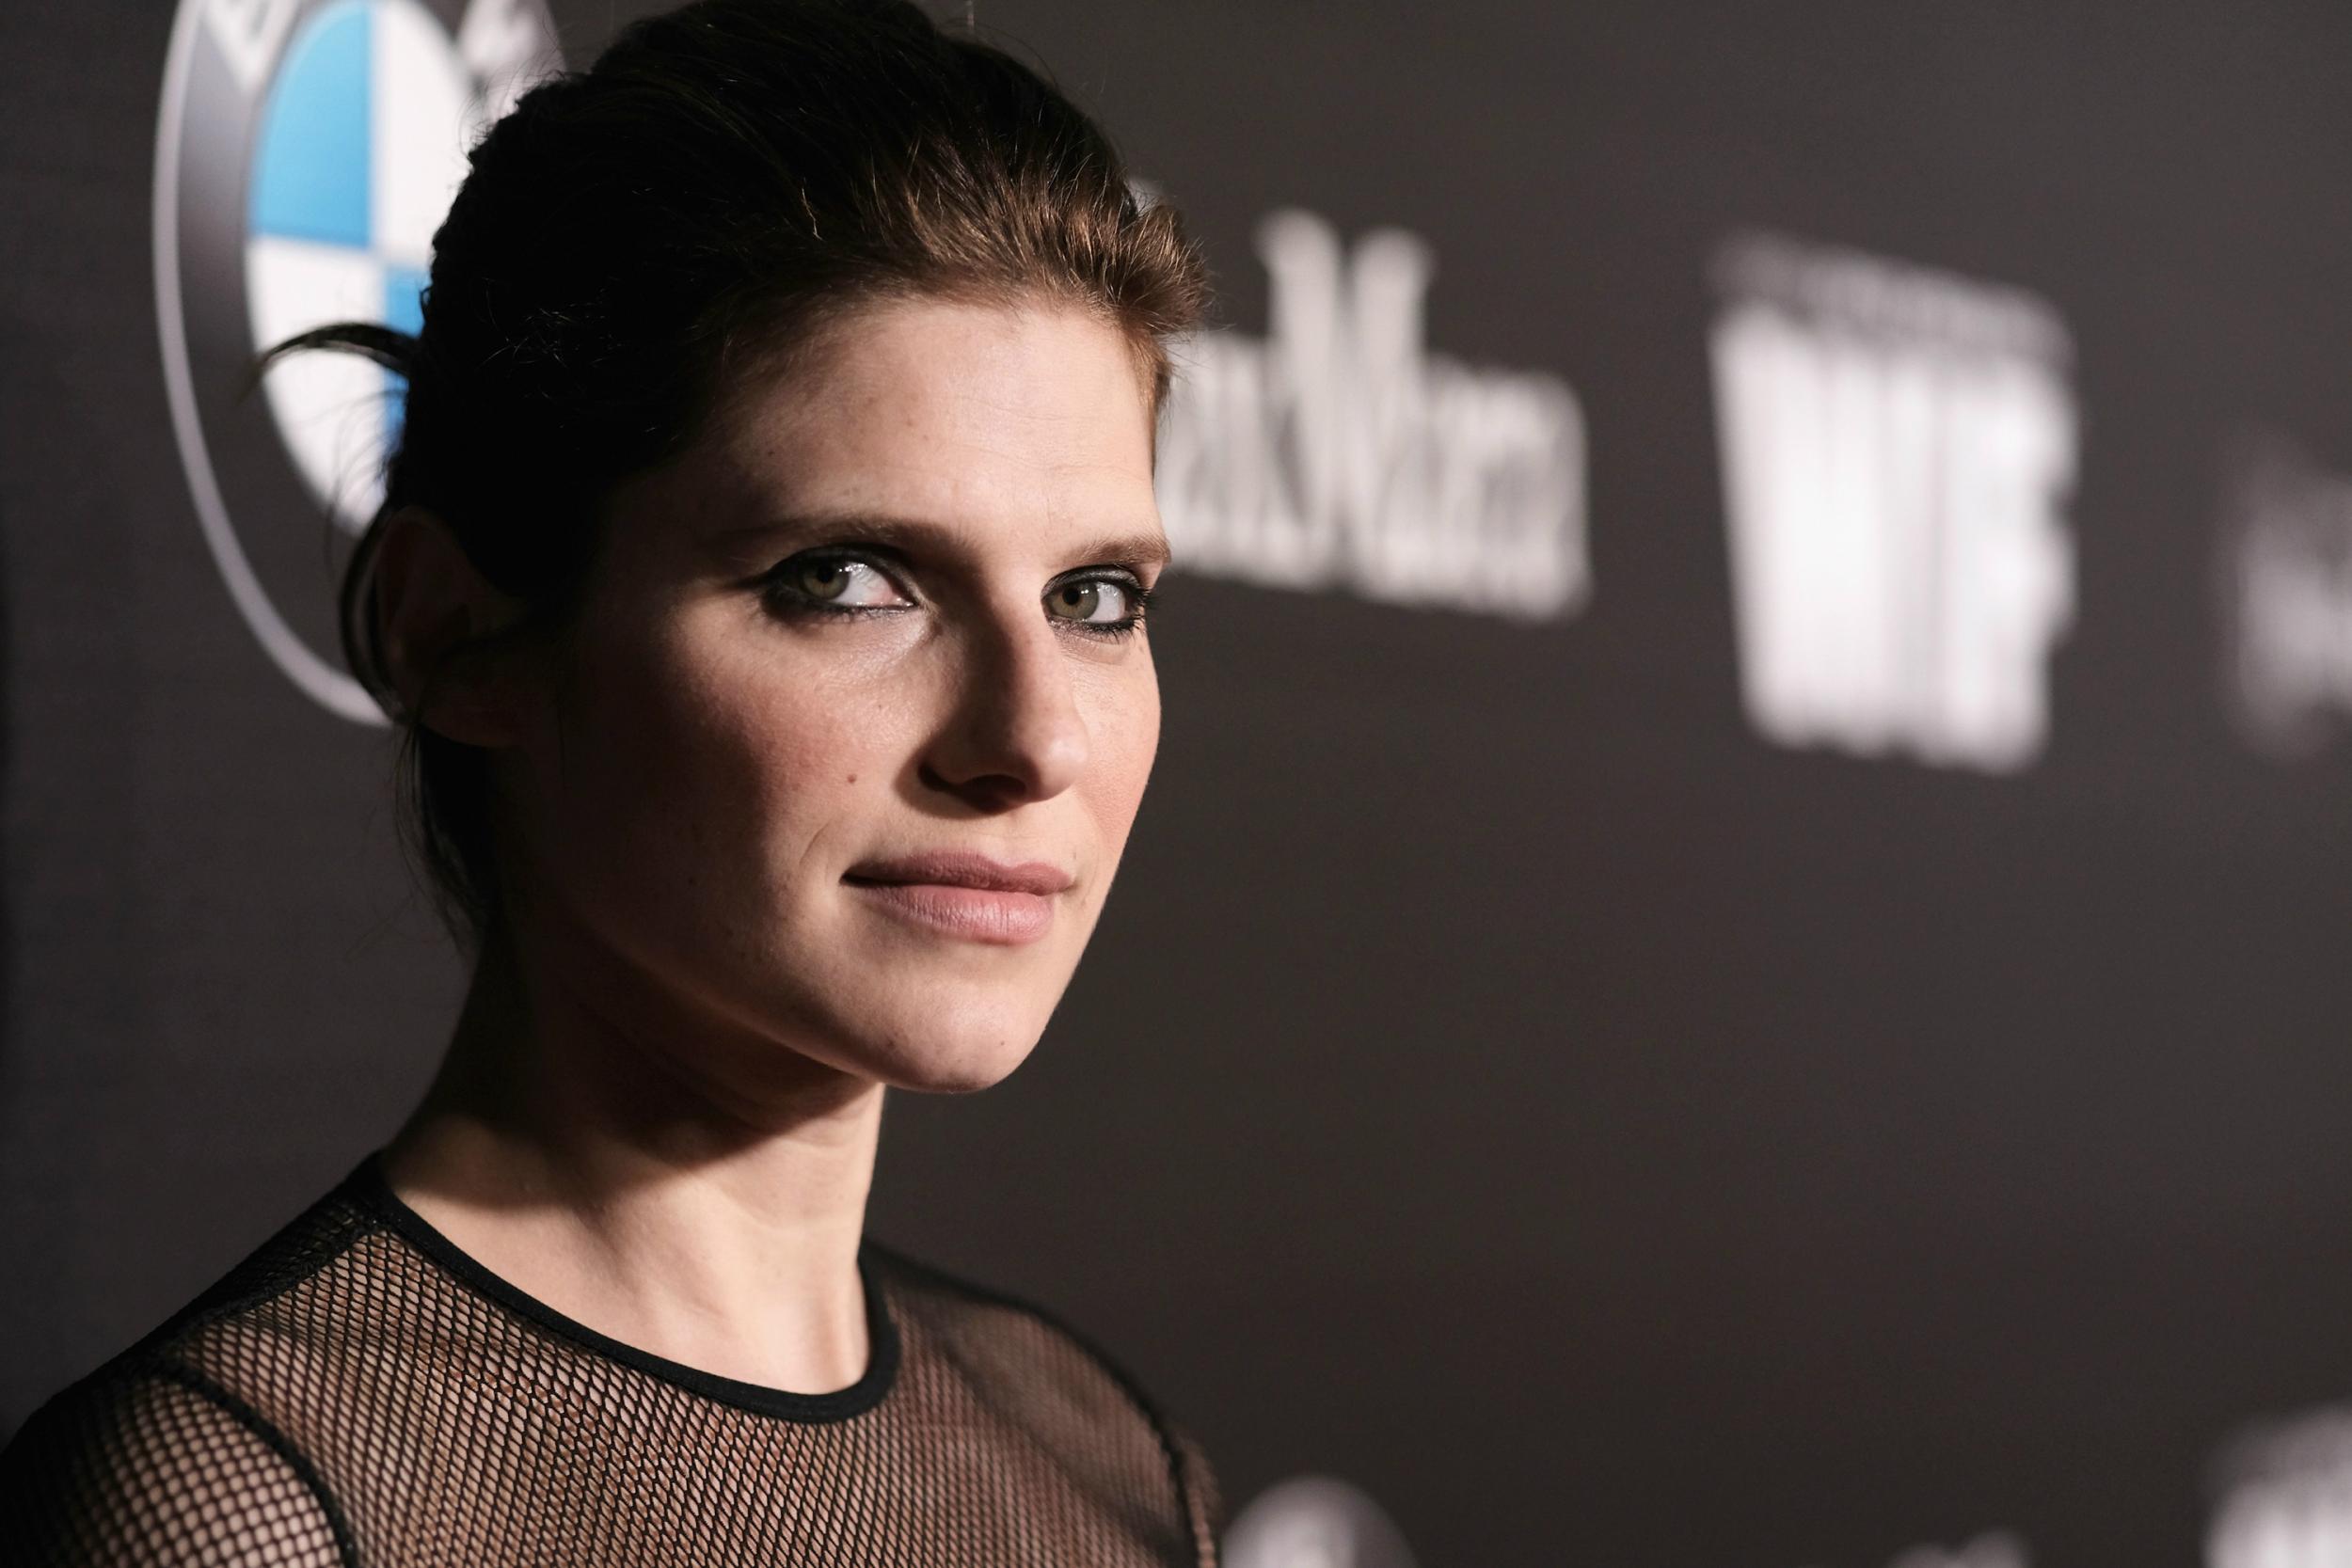 Lake Bell's new film 'I Do... Until I Don't' examines ideas about marriage